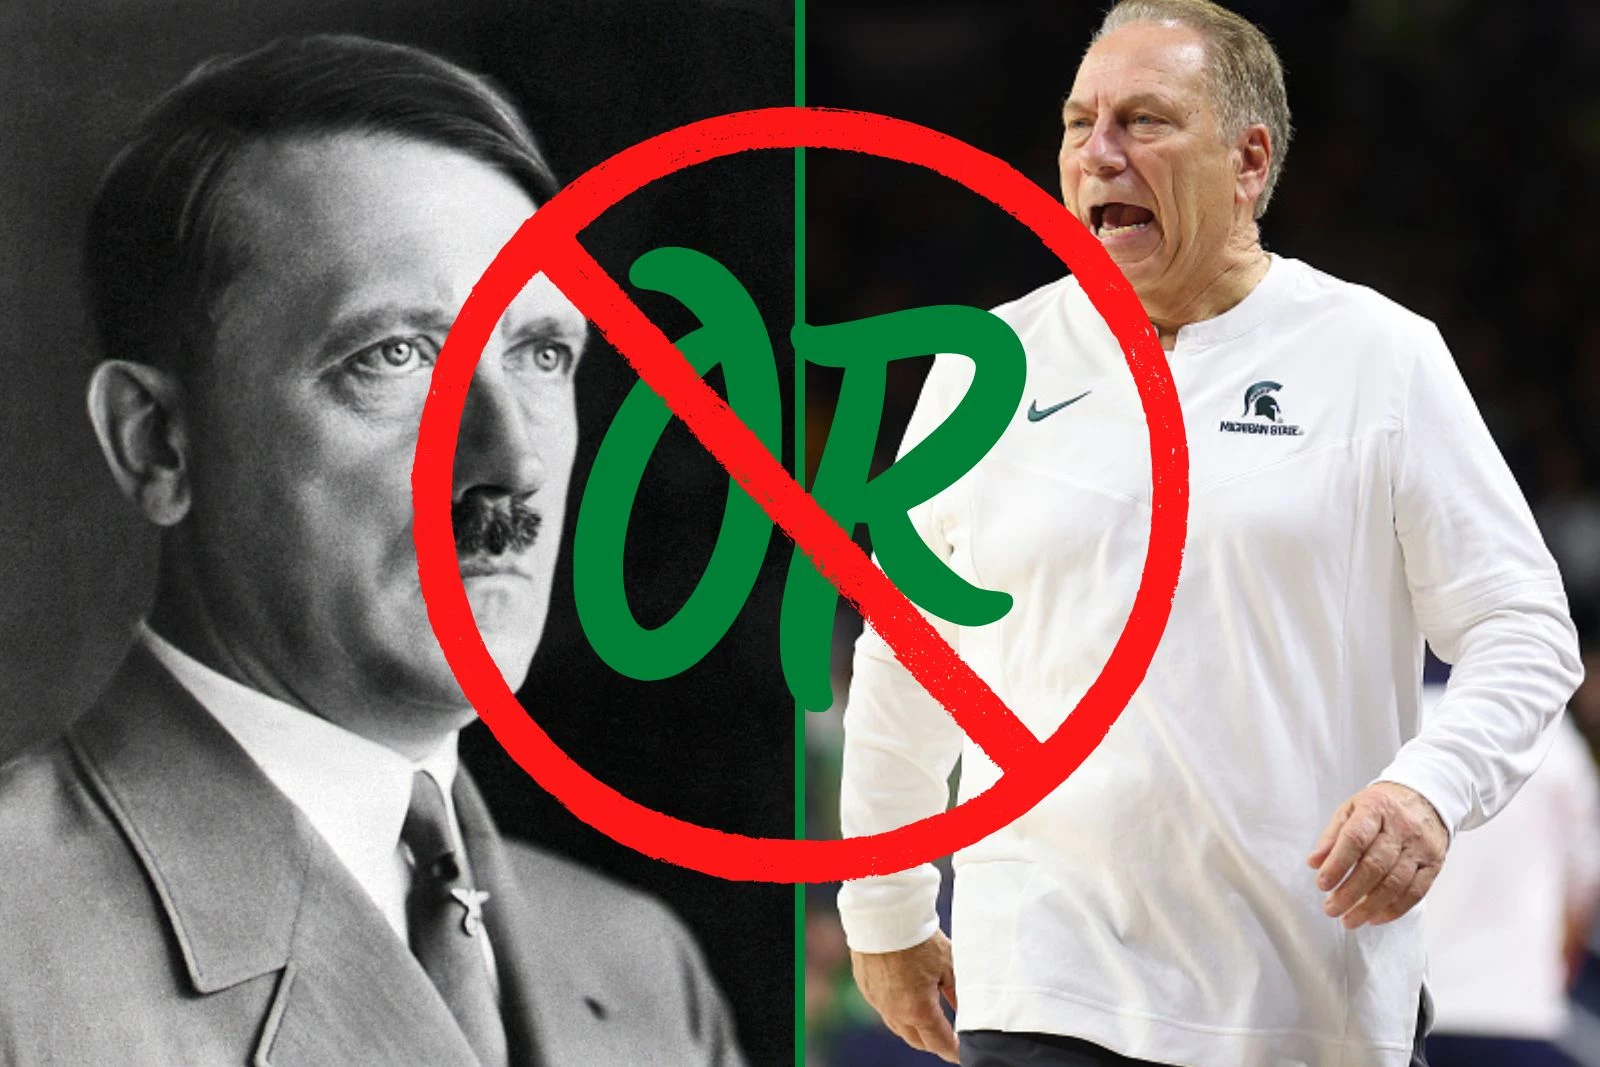 U of M Player Wants No Part of Hitler/Tom Izzo Comparison